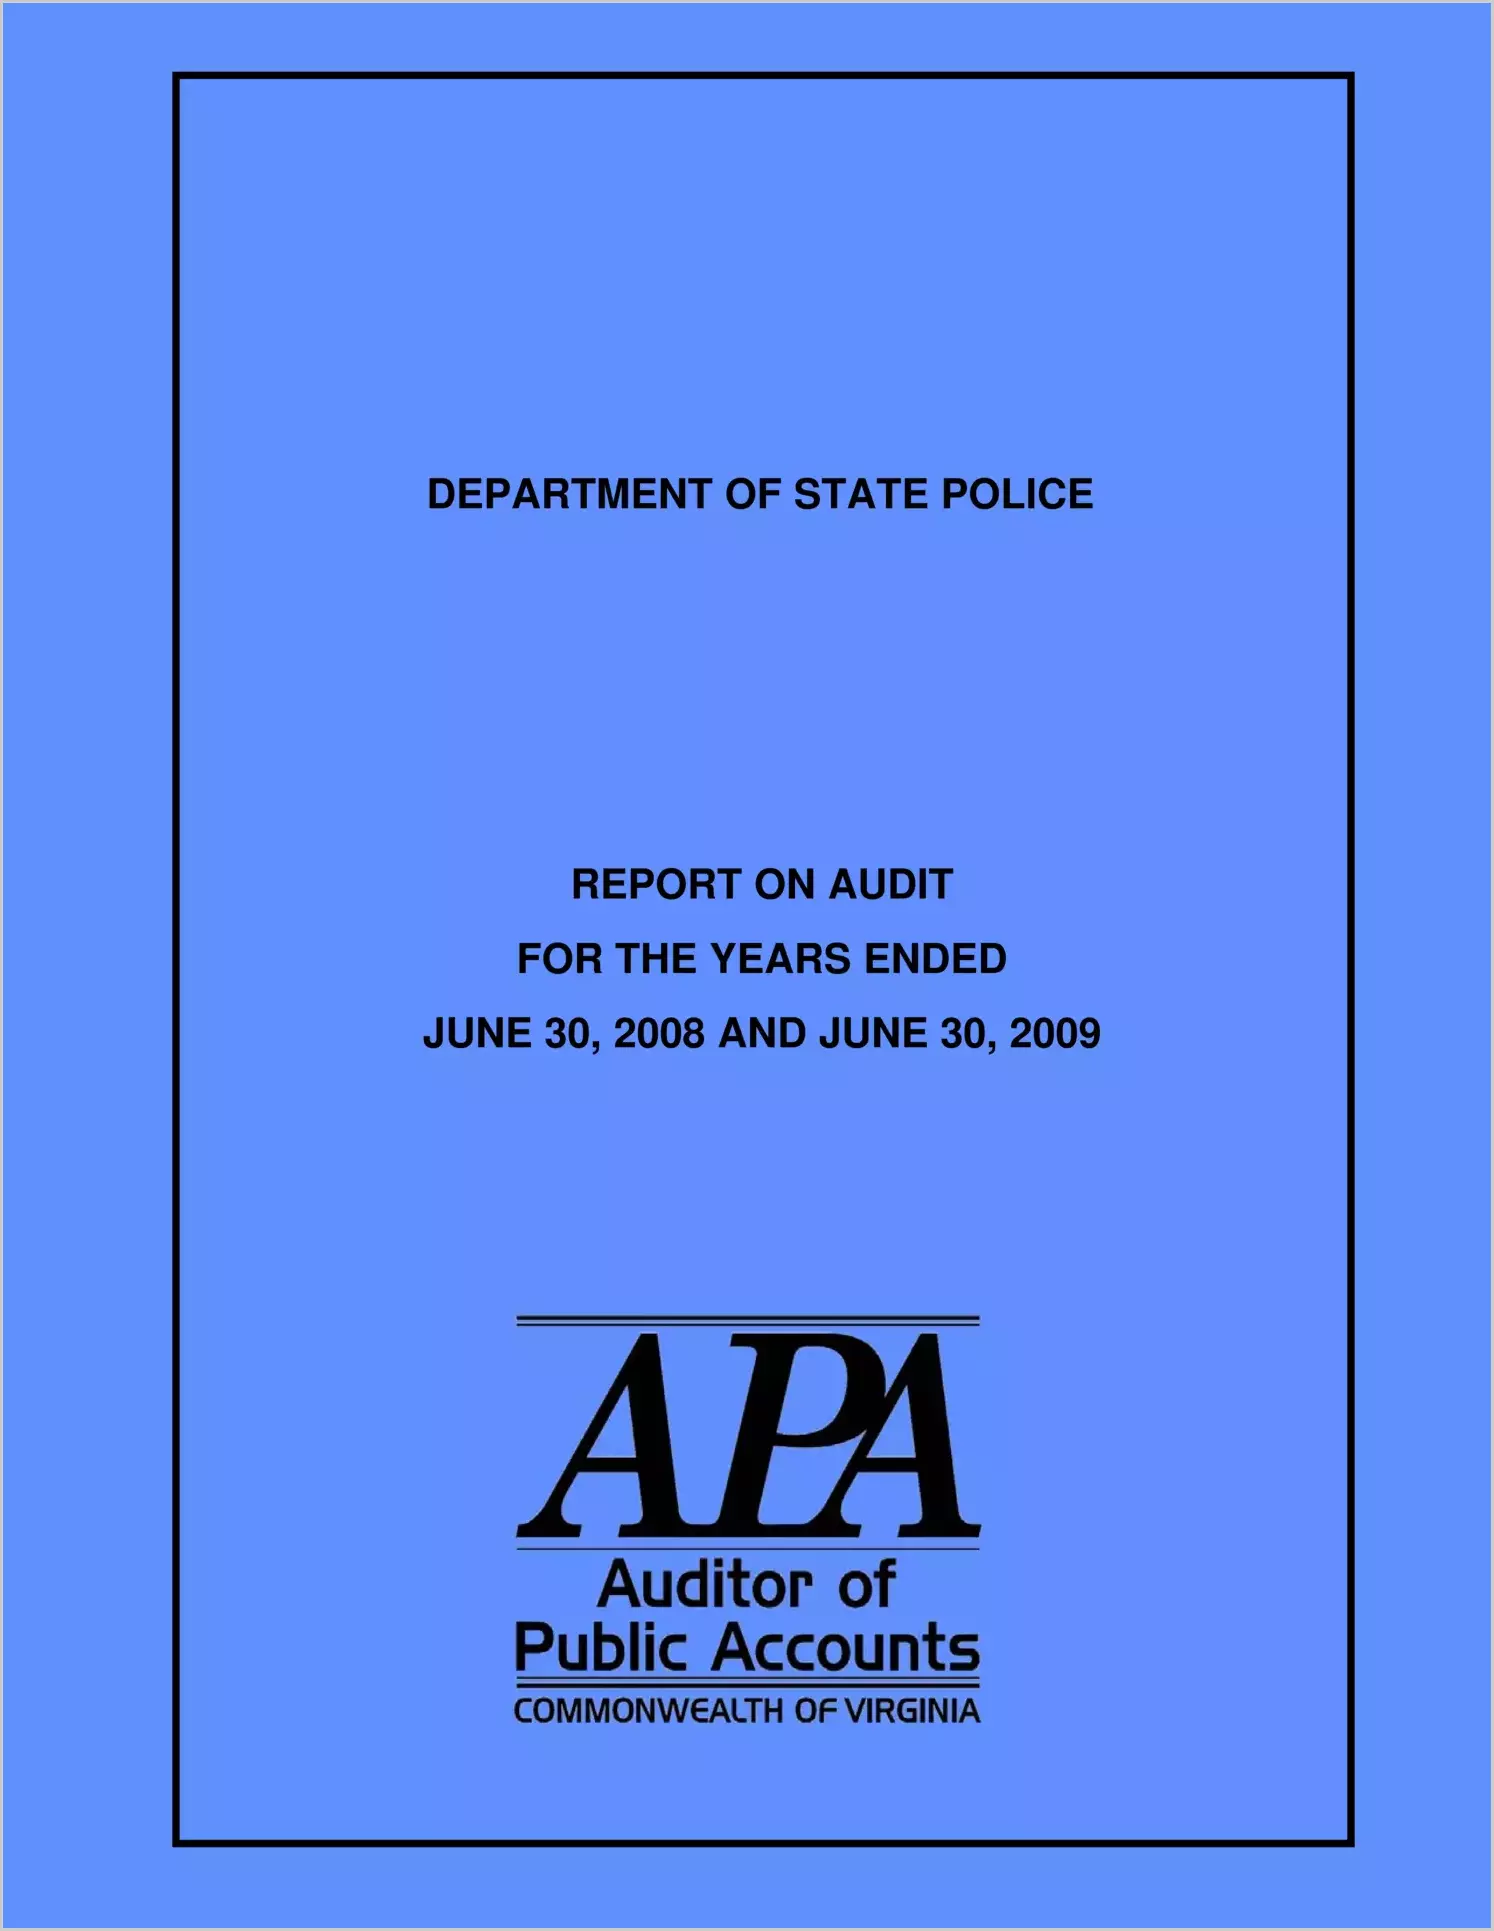 Department of State Police for the years ended June 30, 2008 and June 30, 2009